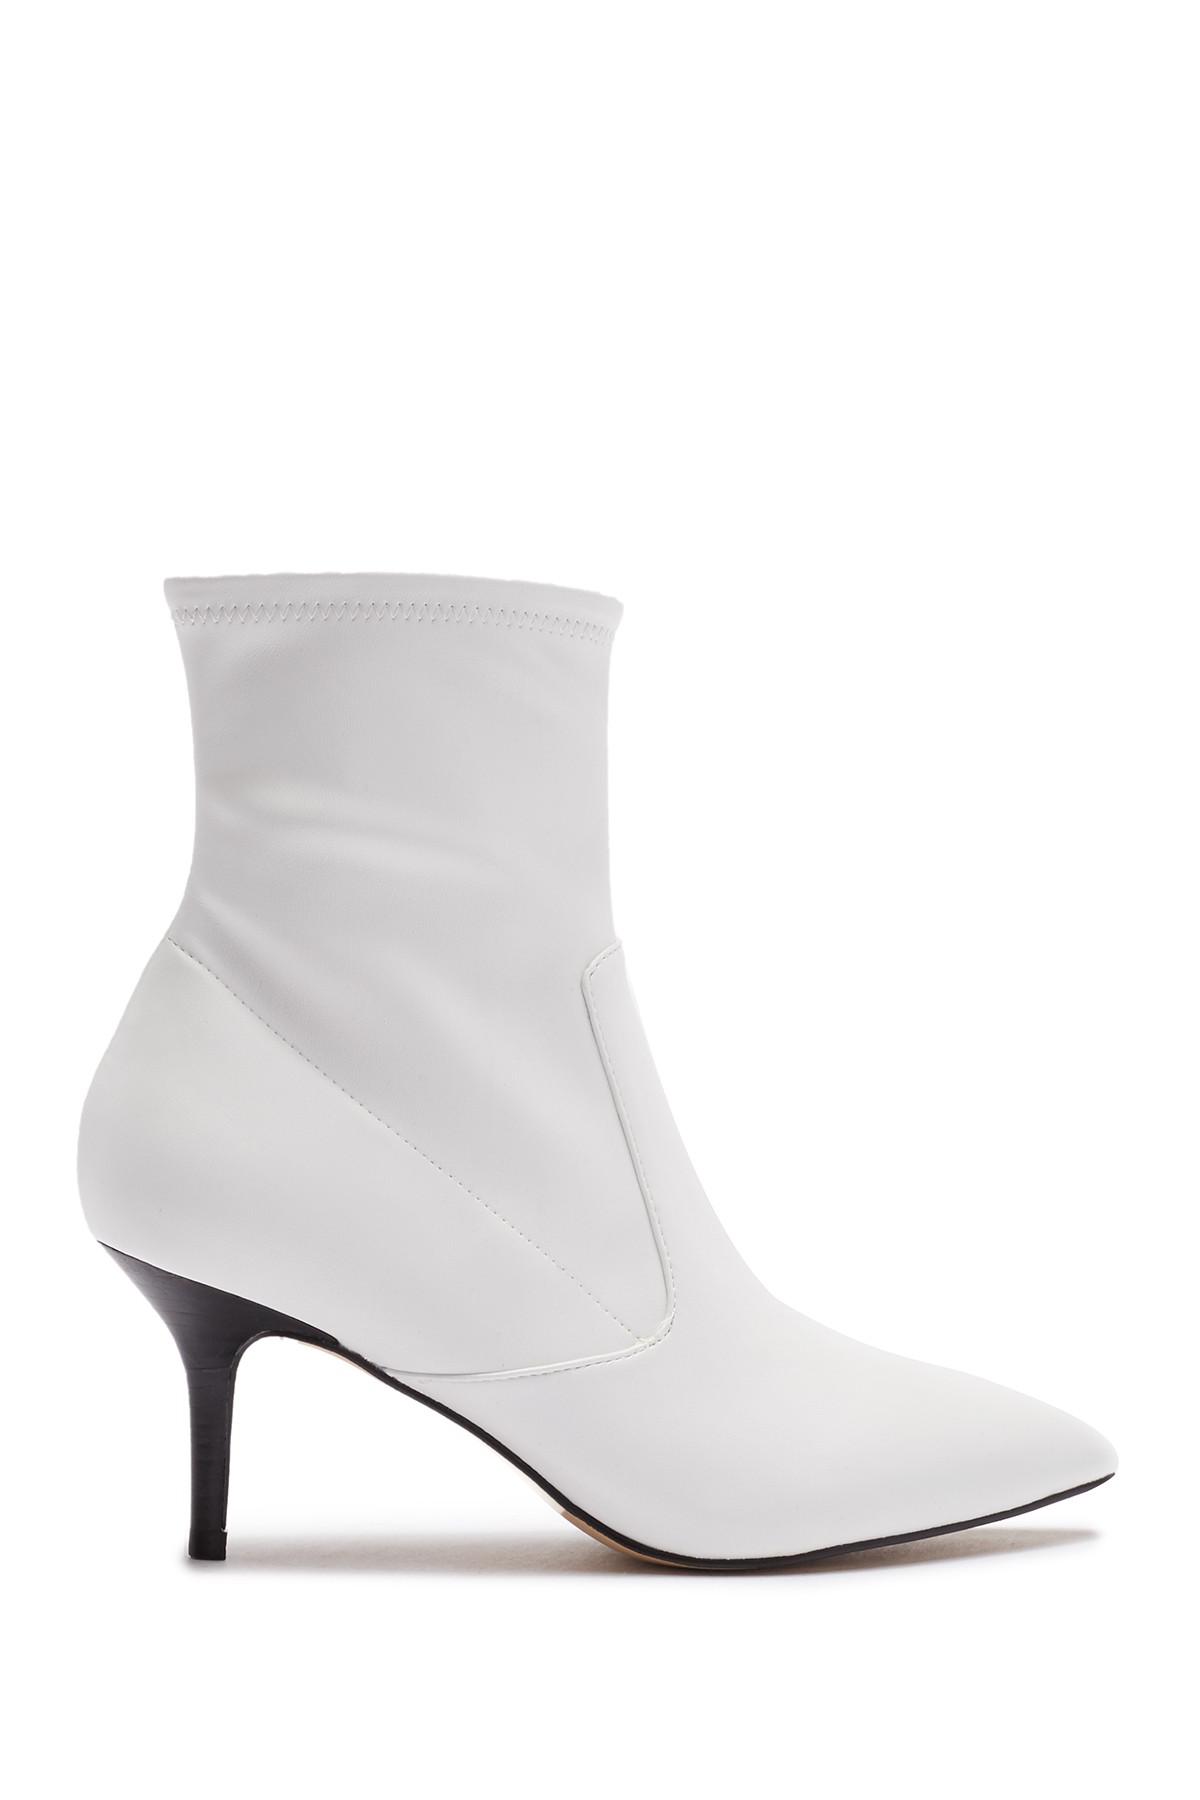 marc fisher adia bootie white